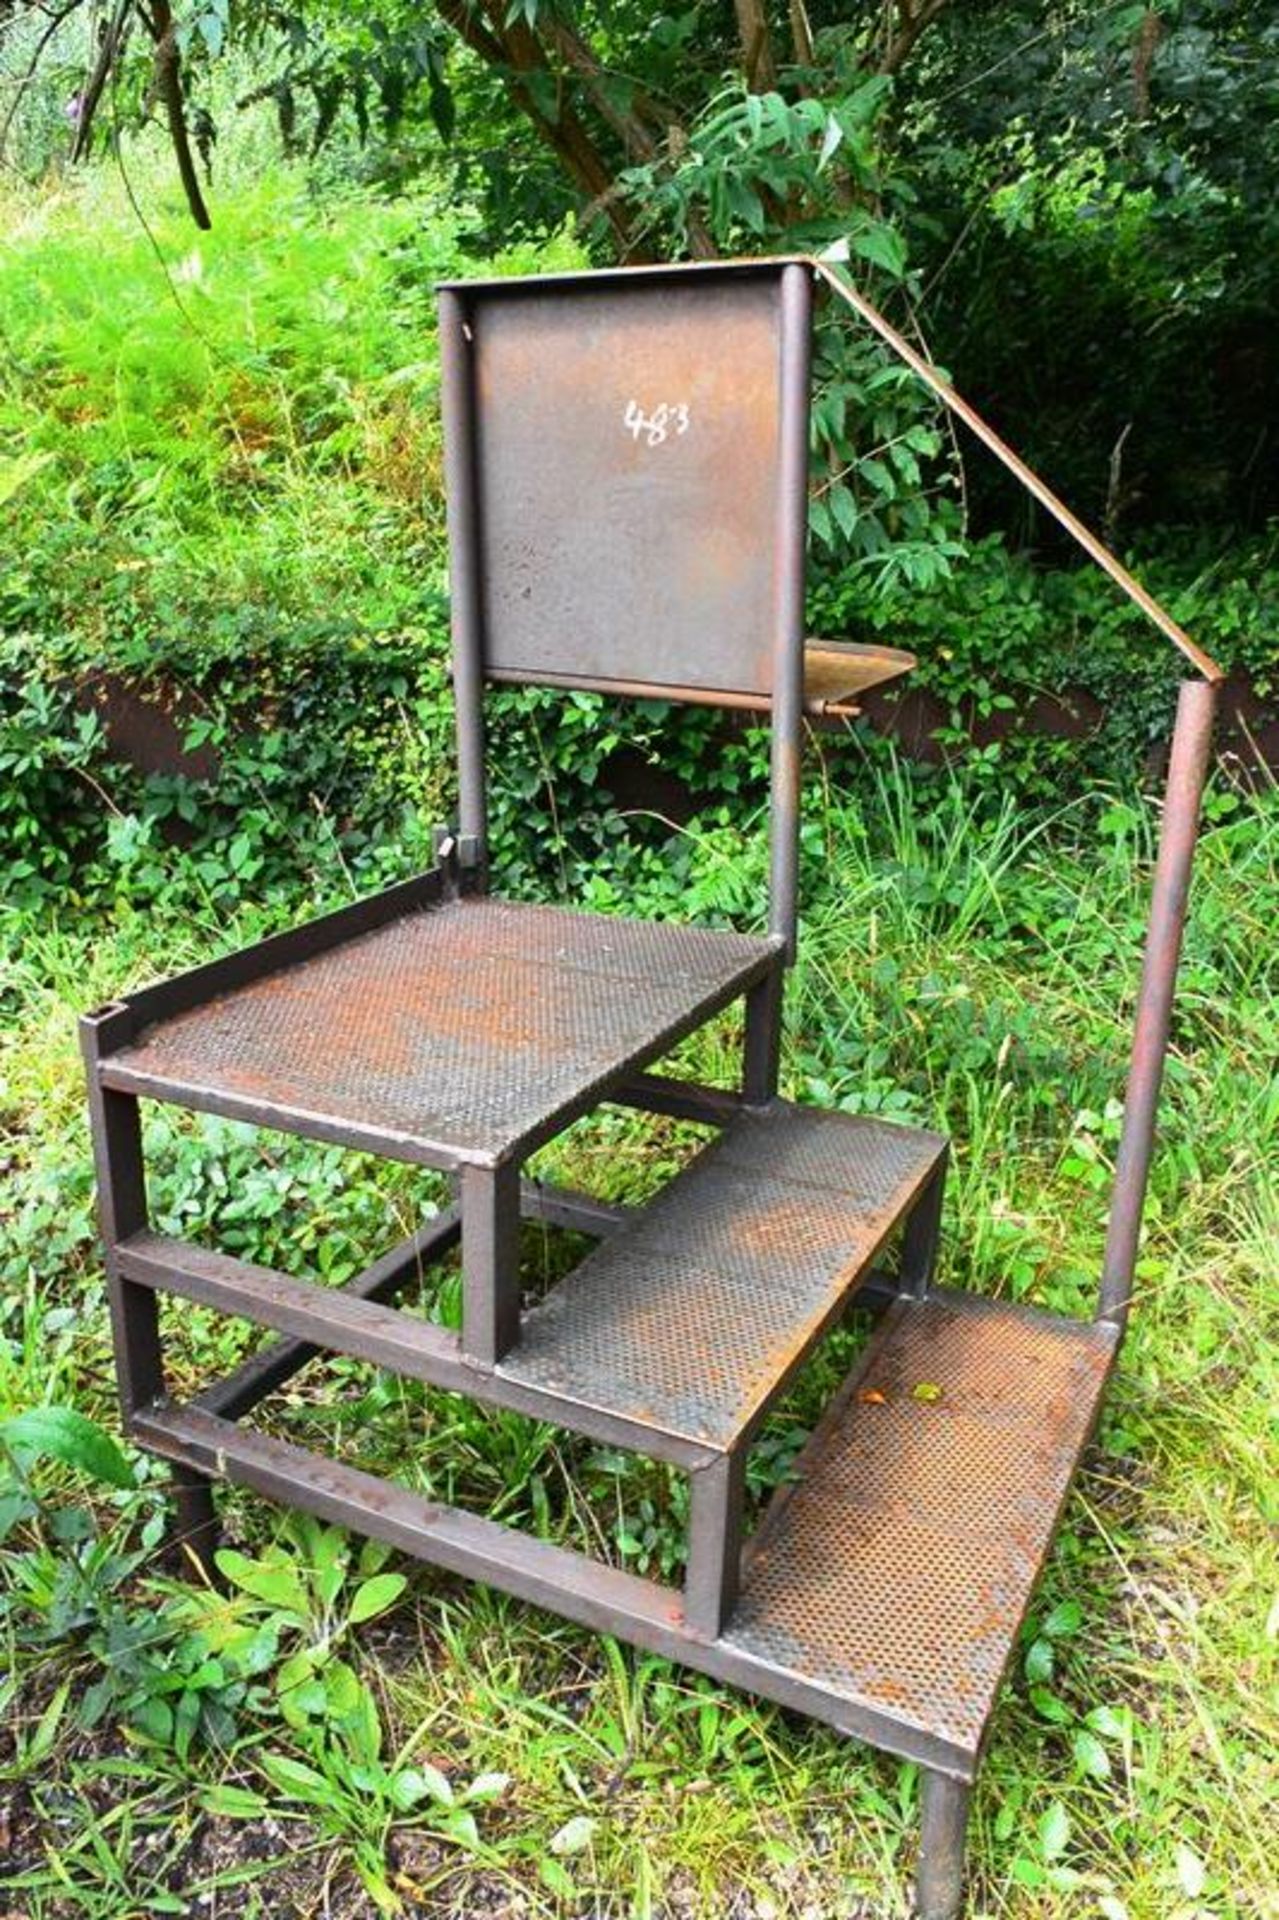 Steel frame 3 tread steps/platform (Recommended collection period for this lot Wednesday 15th -